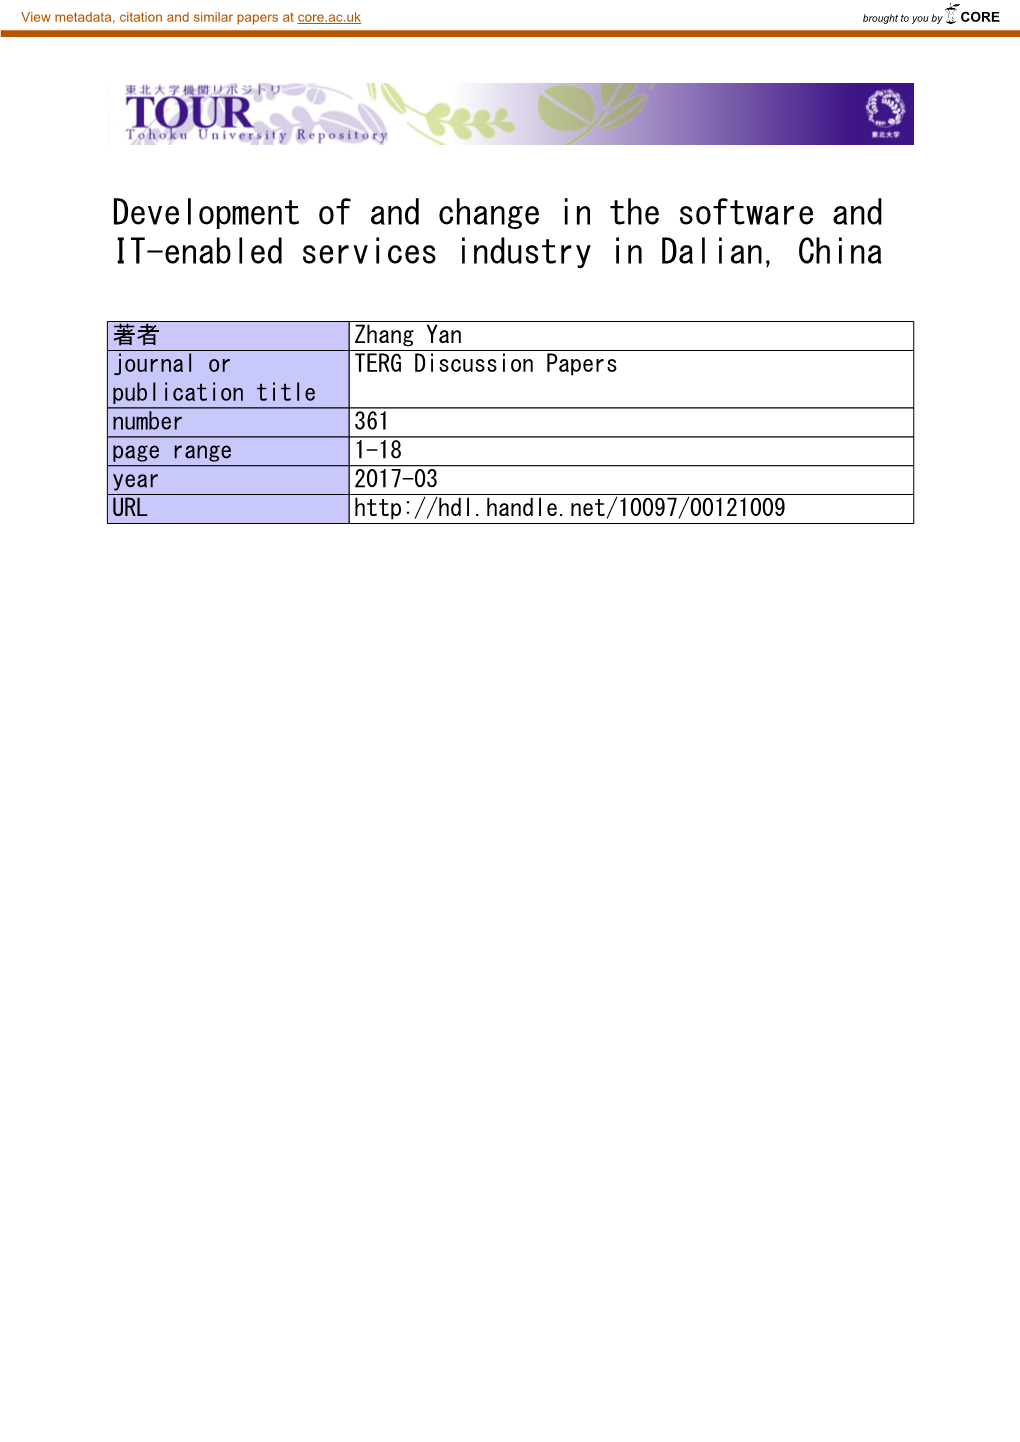 Development of and Change in the Software and IT-Enabled Services Industry in Dalian, China